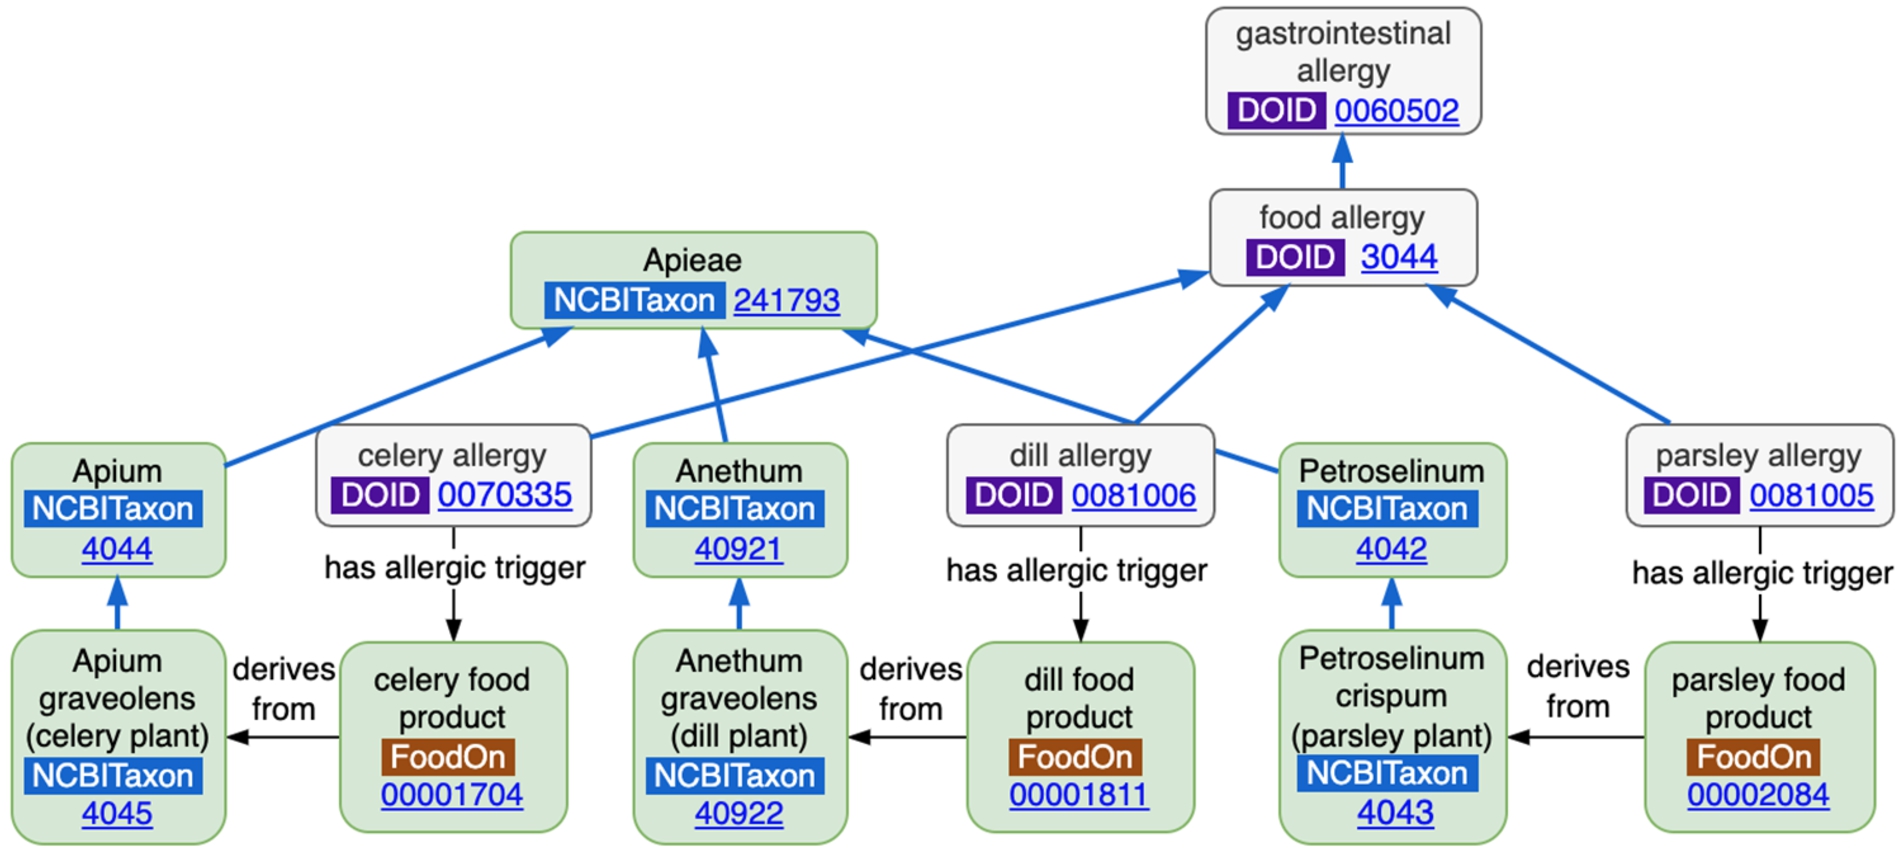 An allergy-food product-taxonomy pattern arising from the relations existing across 3 ontologies.